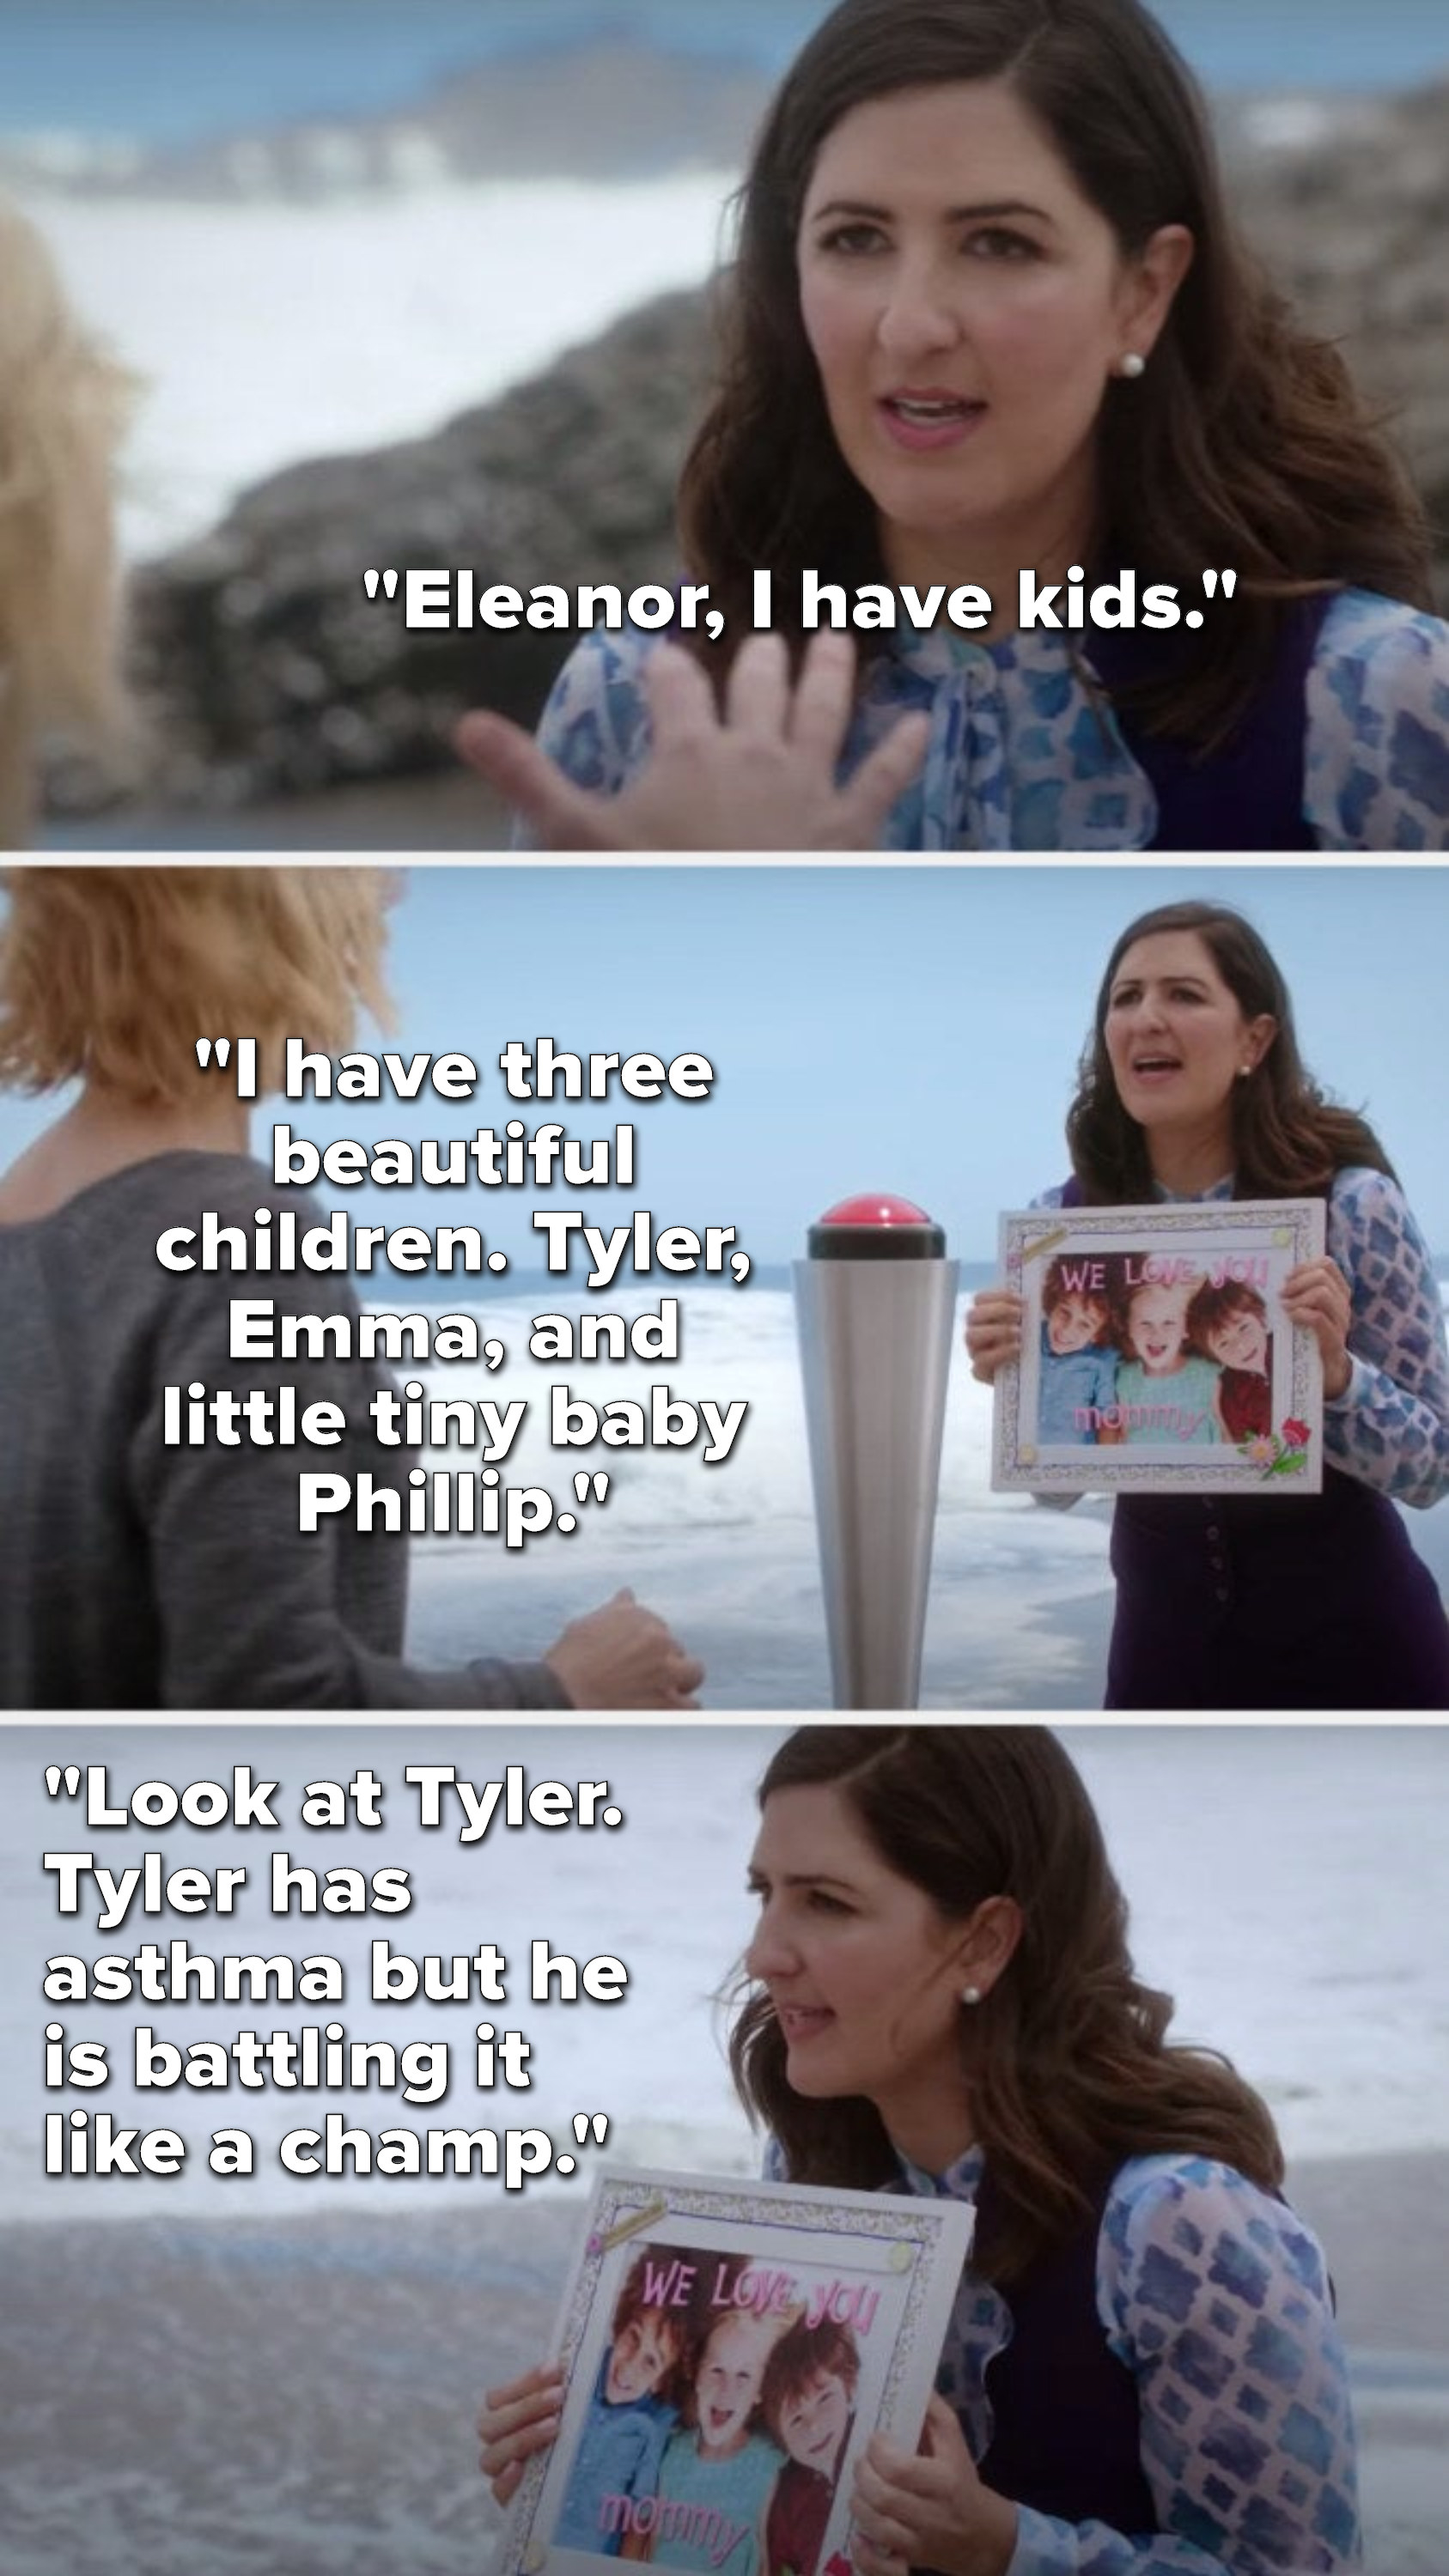 Janet says, &quot;Eleanor, I have kids,&quot; then she holds up a picture of them and says, &quot;I have 3 beautiful children, Tyler, Emma, and little tiny baby Phillip, look at Tyler, Tyler has asthma but he is battling it like a champ&quot;